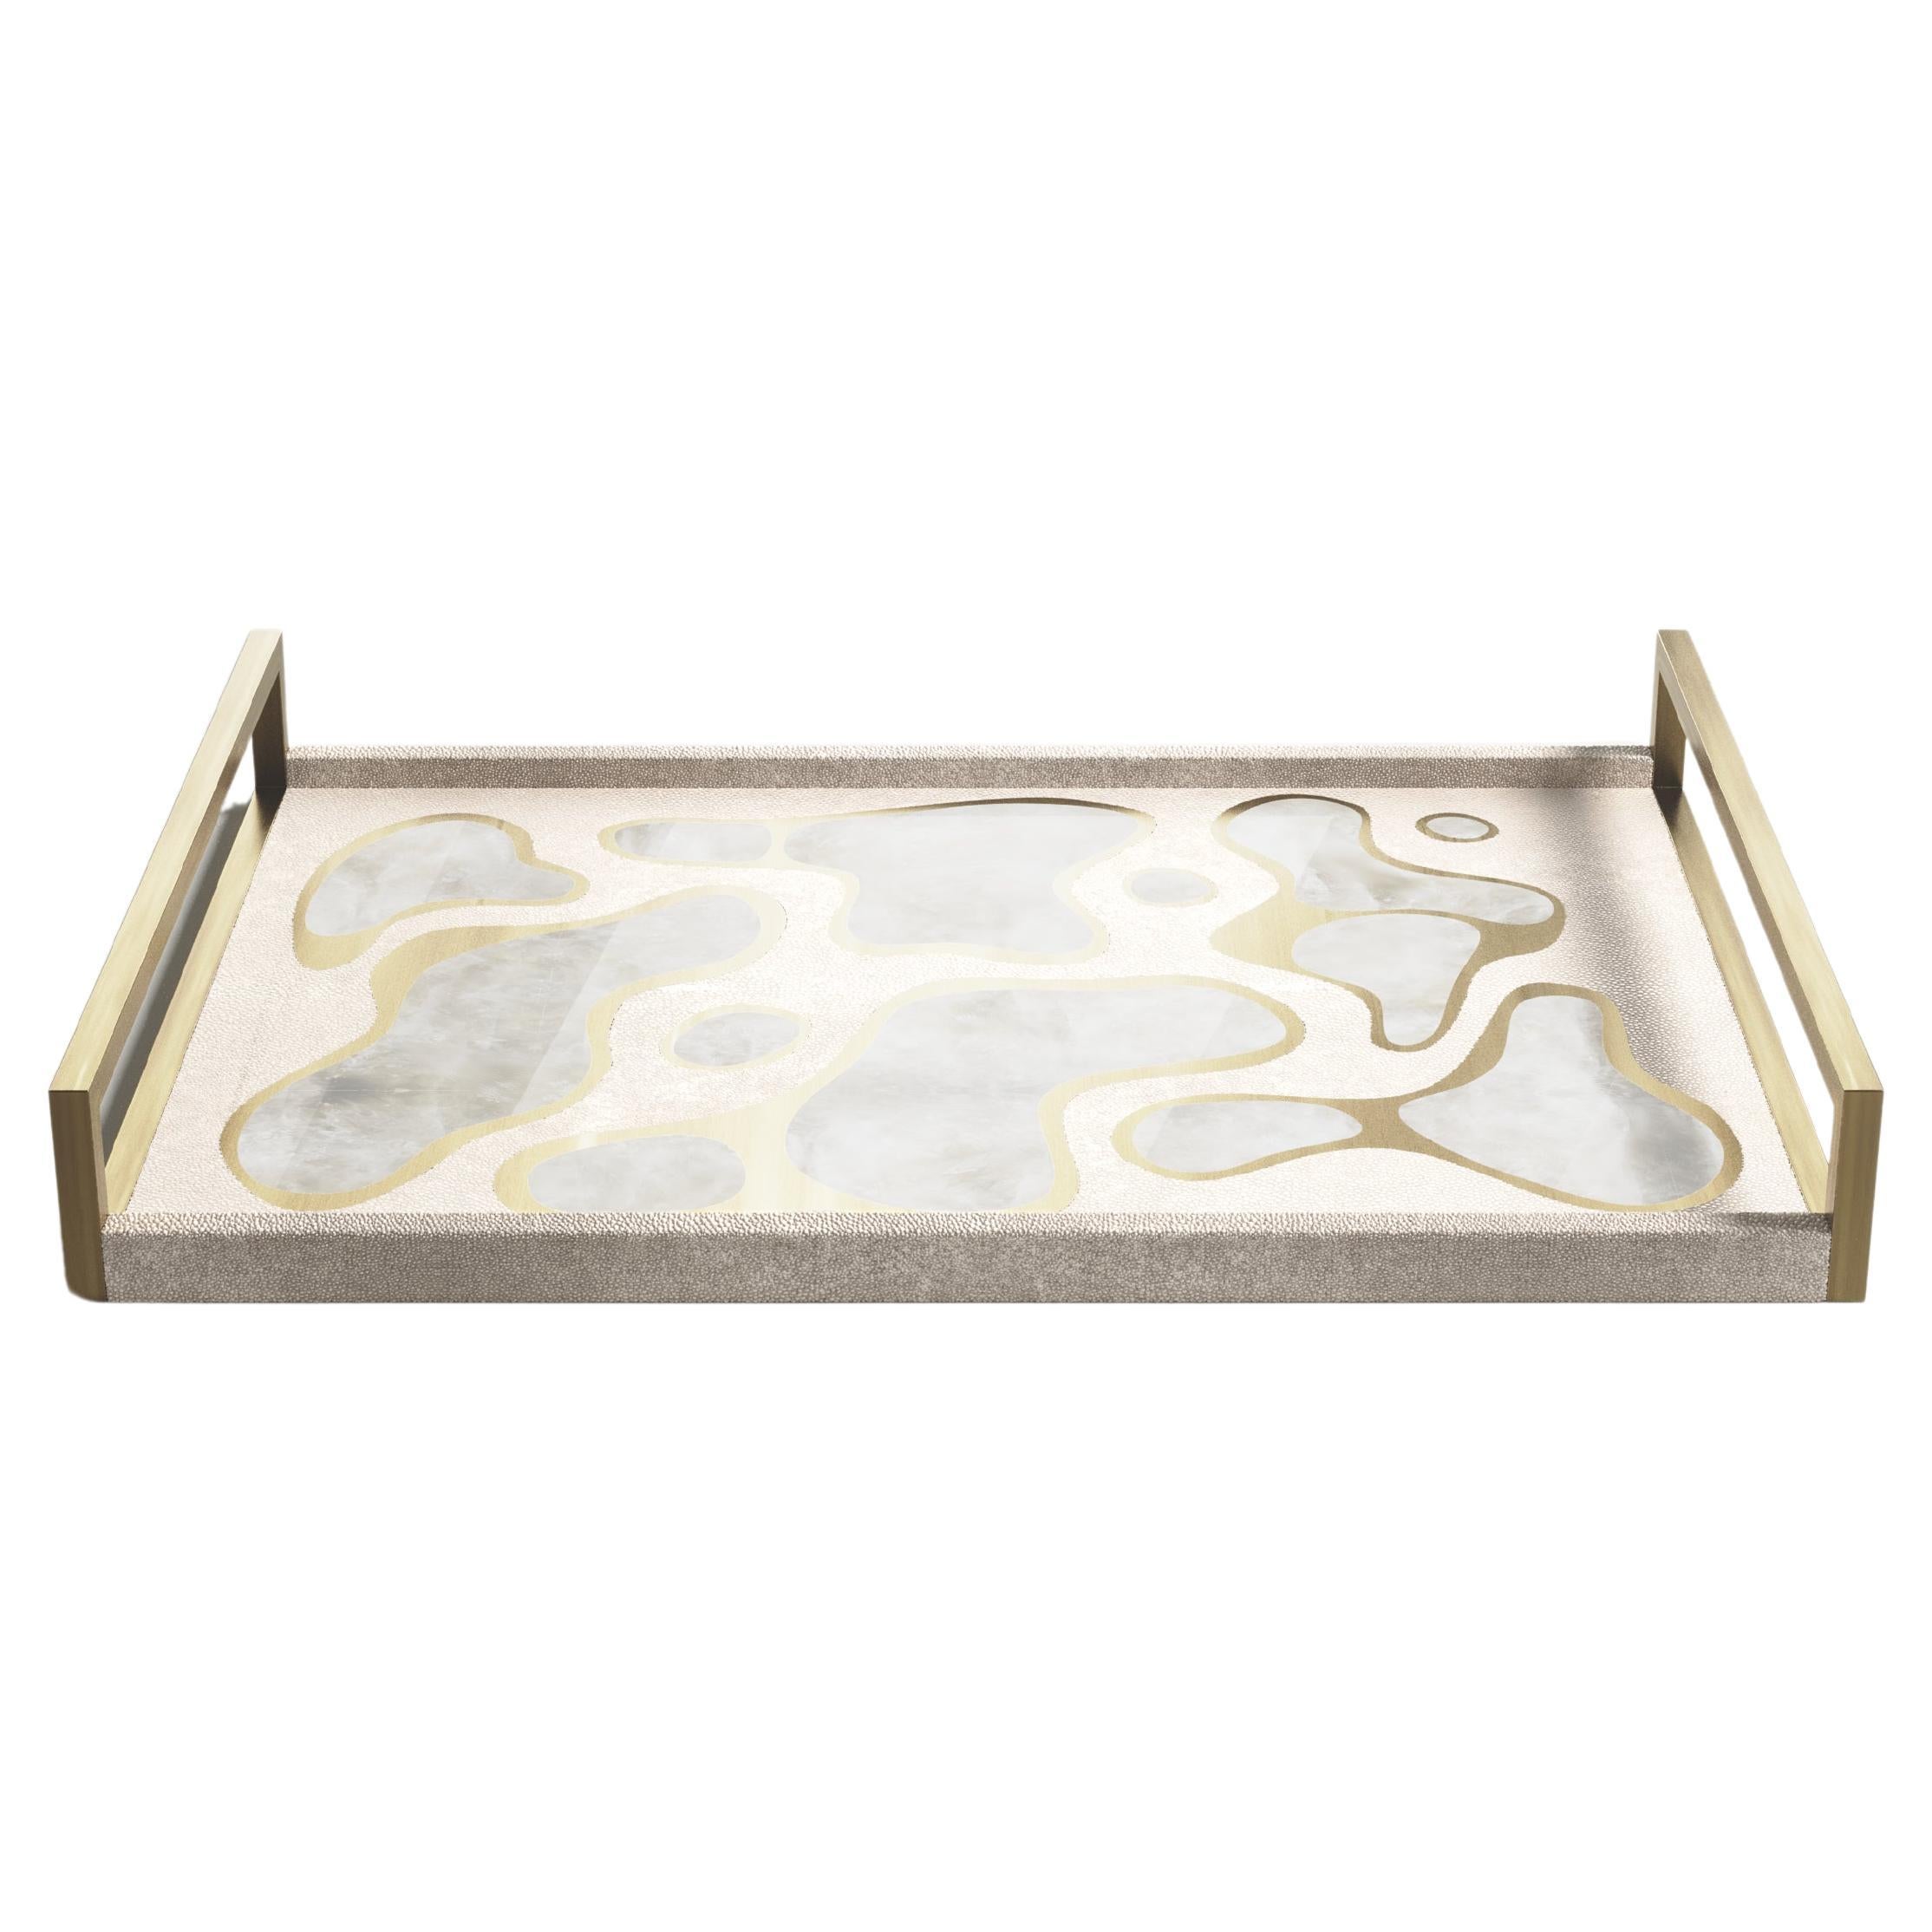 Rectangular Tray in in Cream Shagreen with Bronze-Patina Brass by Kifu Paris For Sale